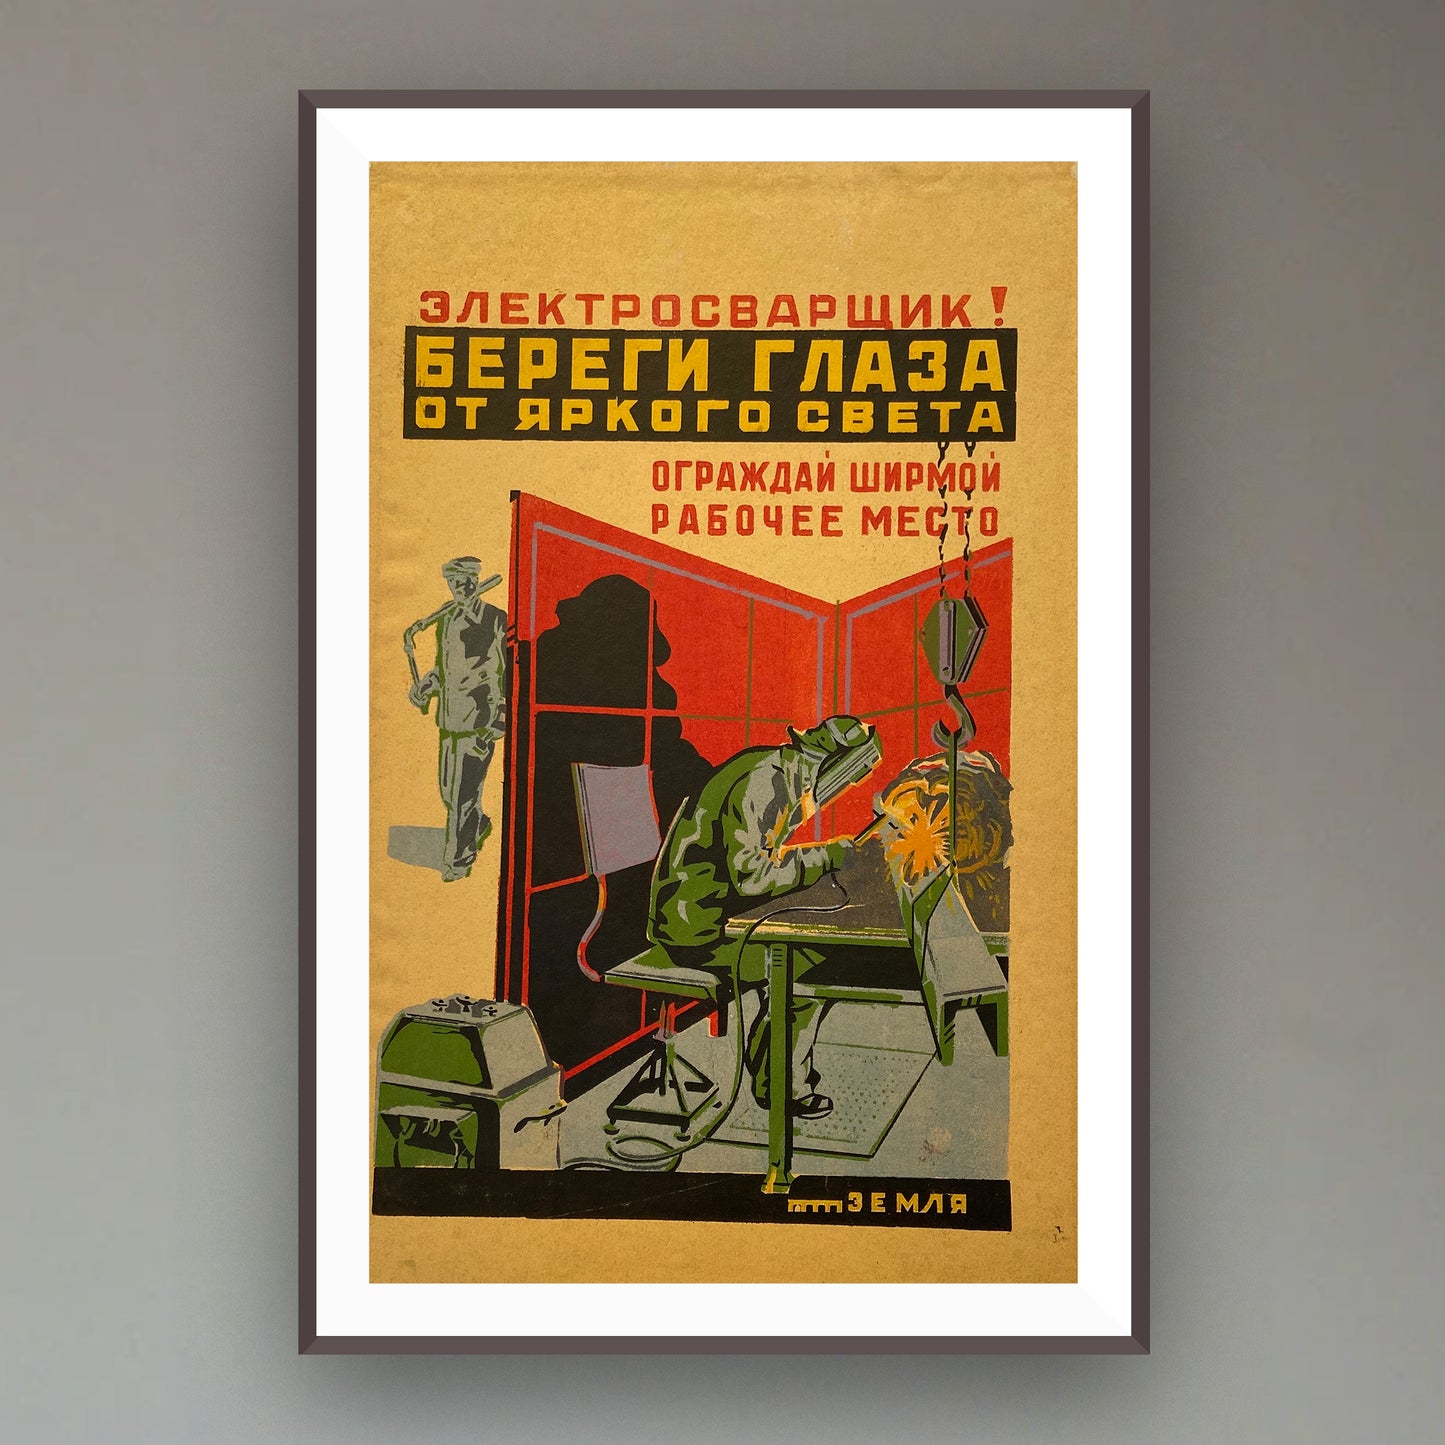 Poster, "Electro welder, keep your eyes from the bright light!", Worker safety VEF Riga, Latvian SSR, 1960s